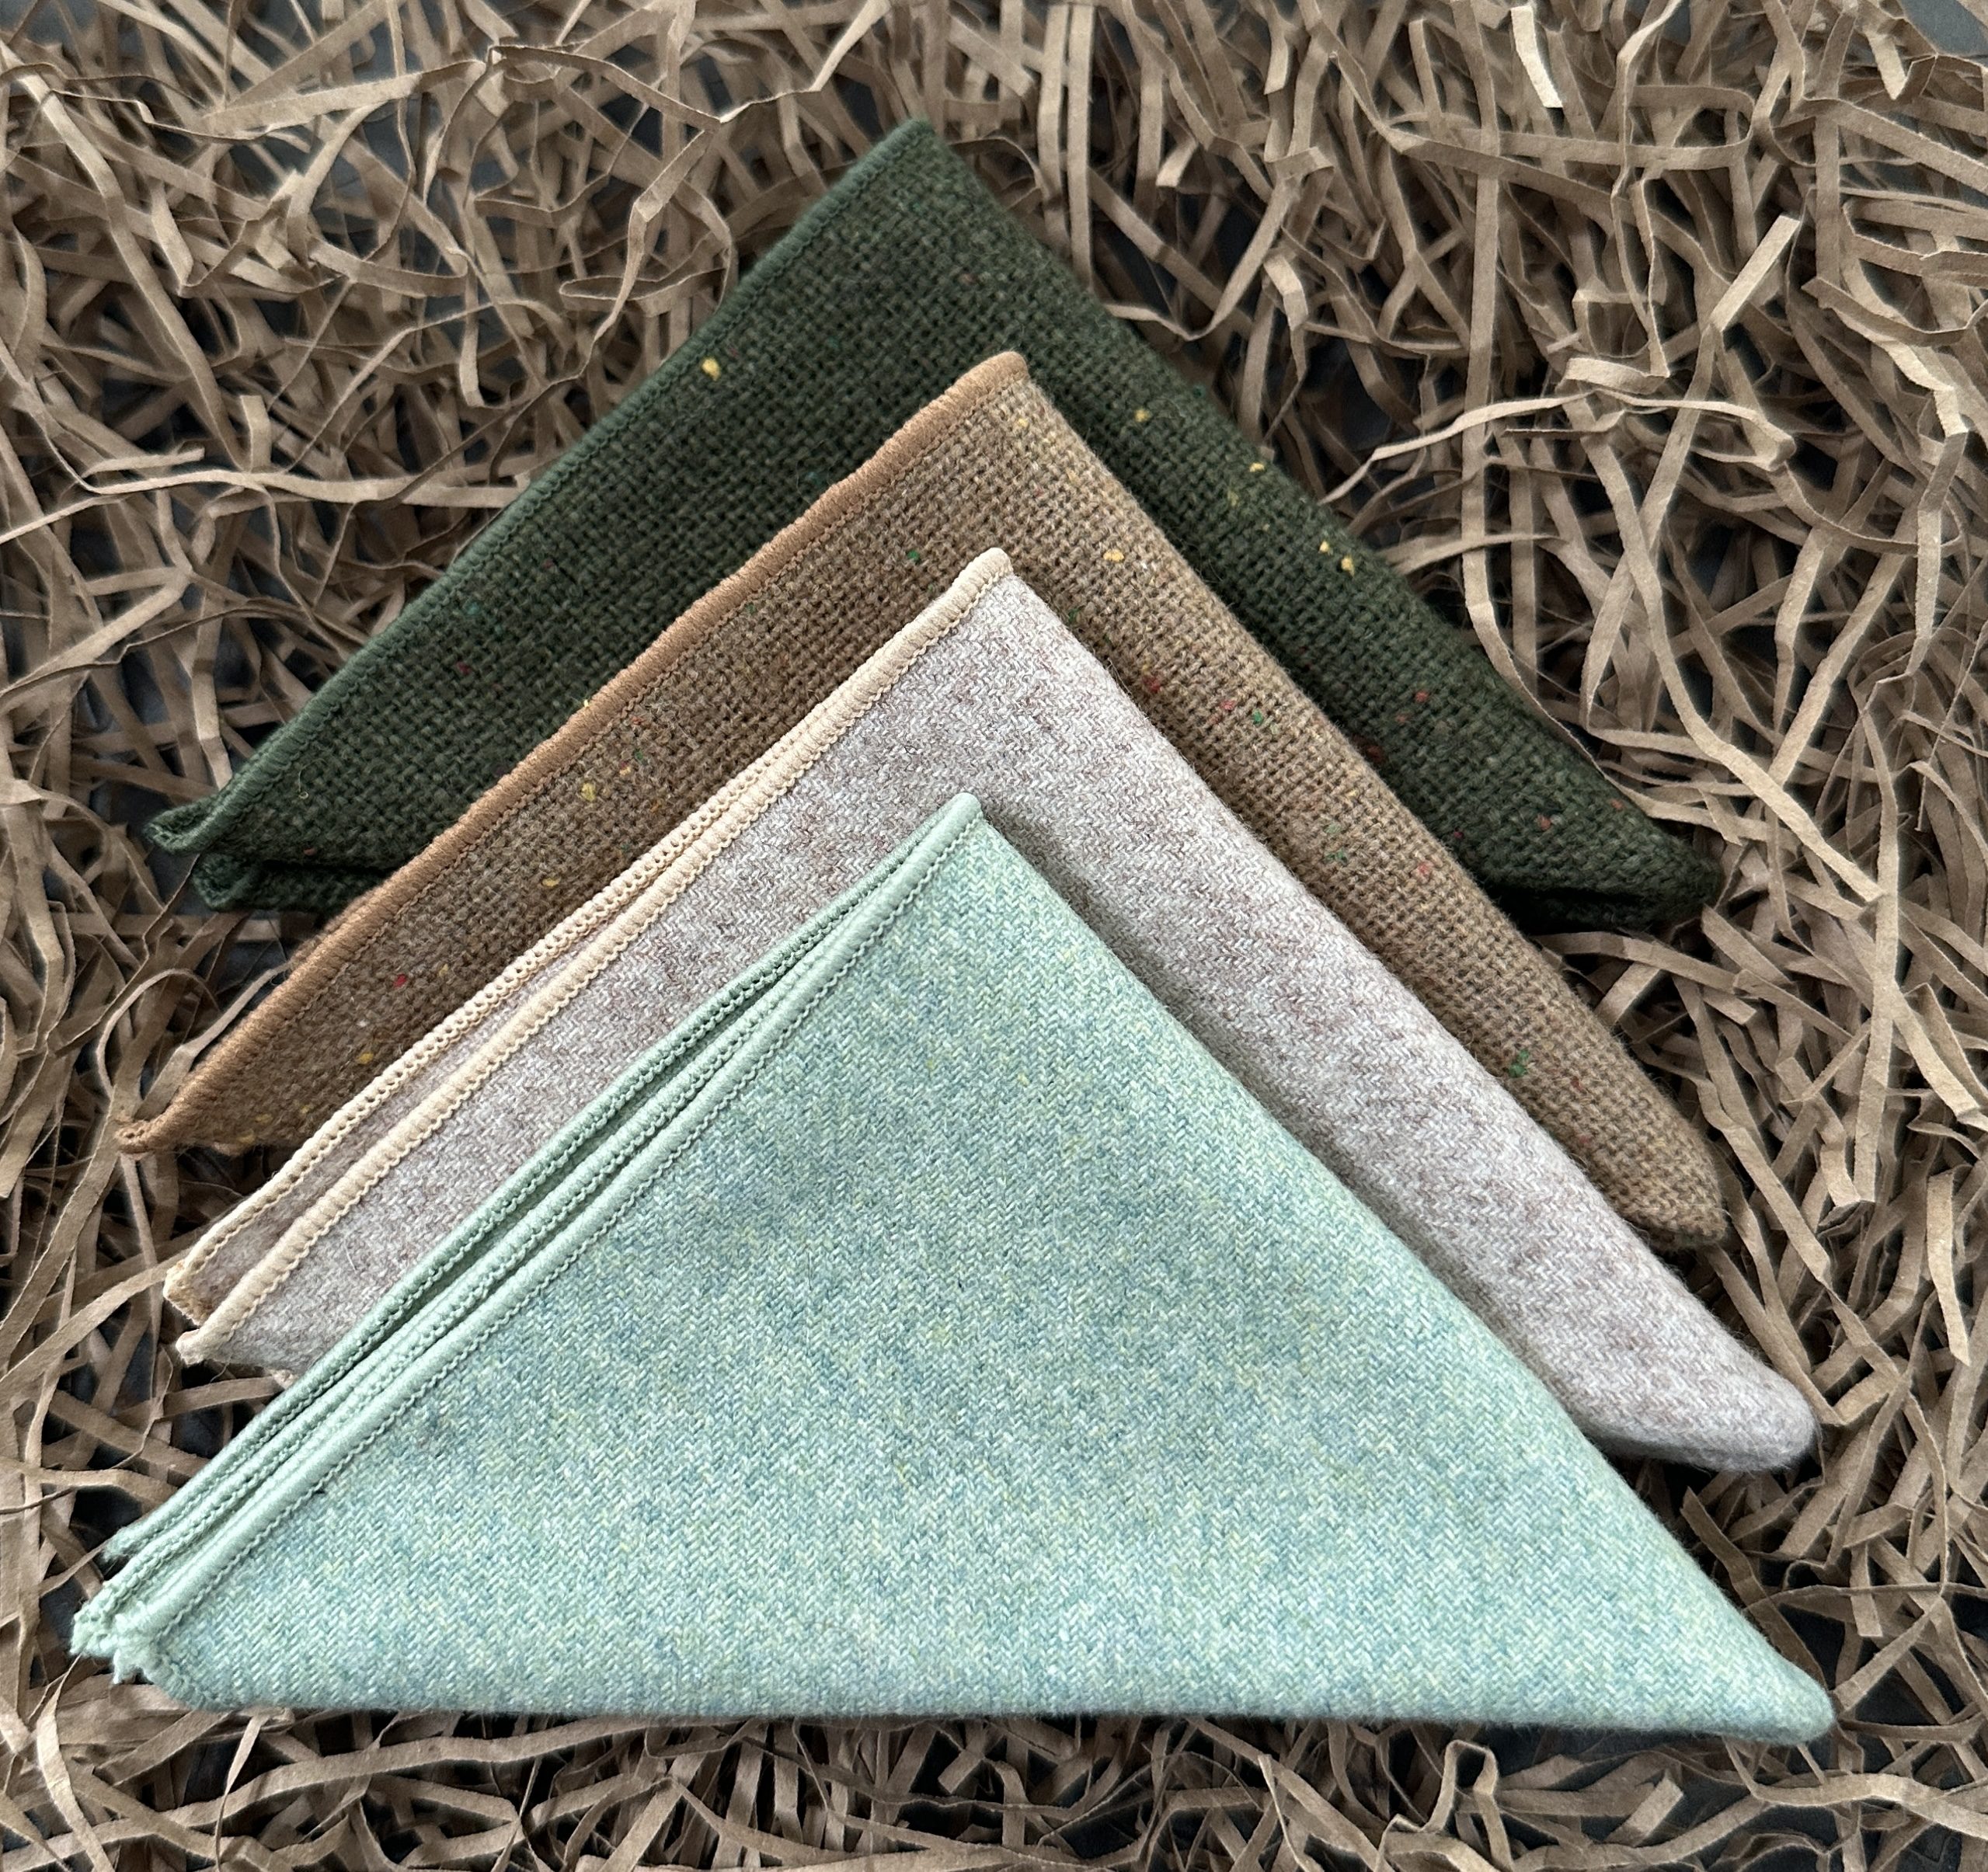 A set of green wool pocket squares for mens gifts and unique groomsmen gifts.